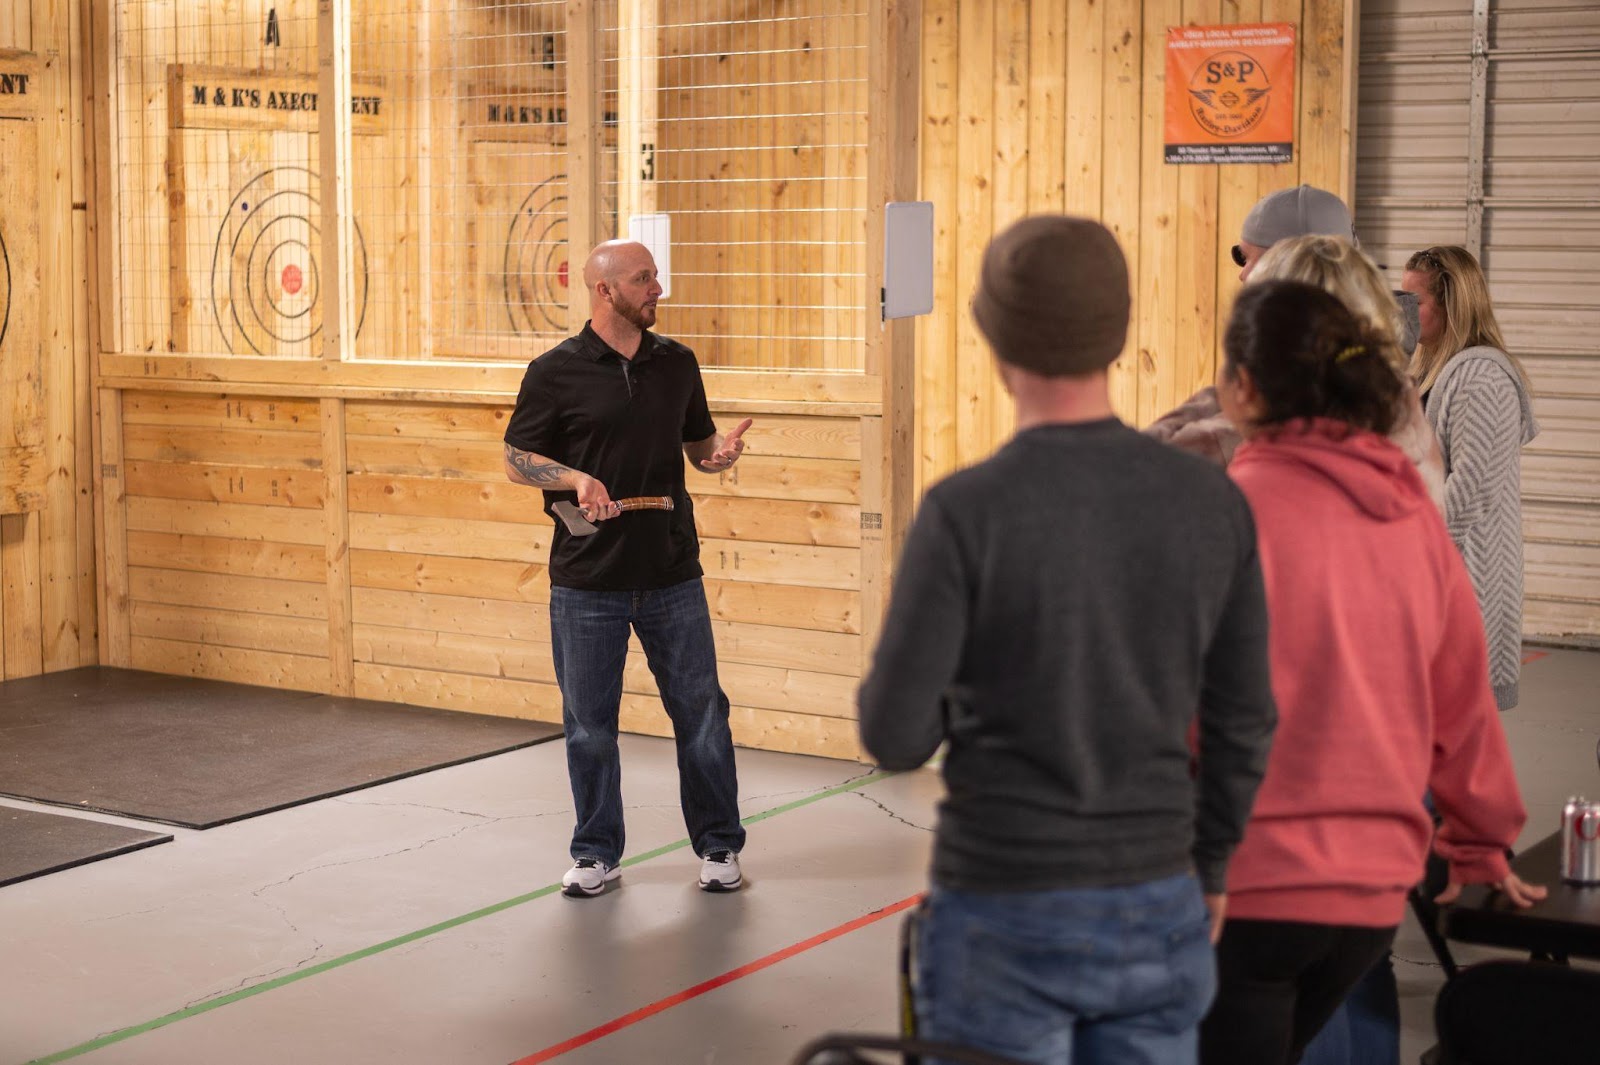 Eye on the target: new axe-throwing business thriving with help from WV SBDC 